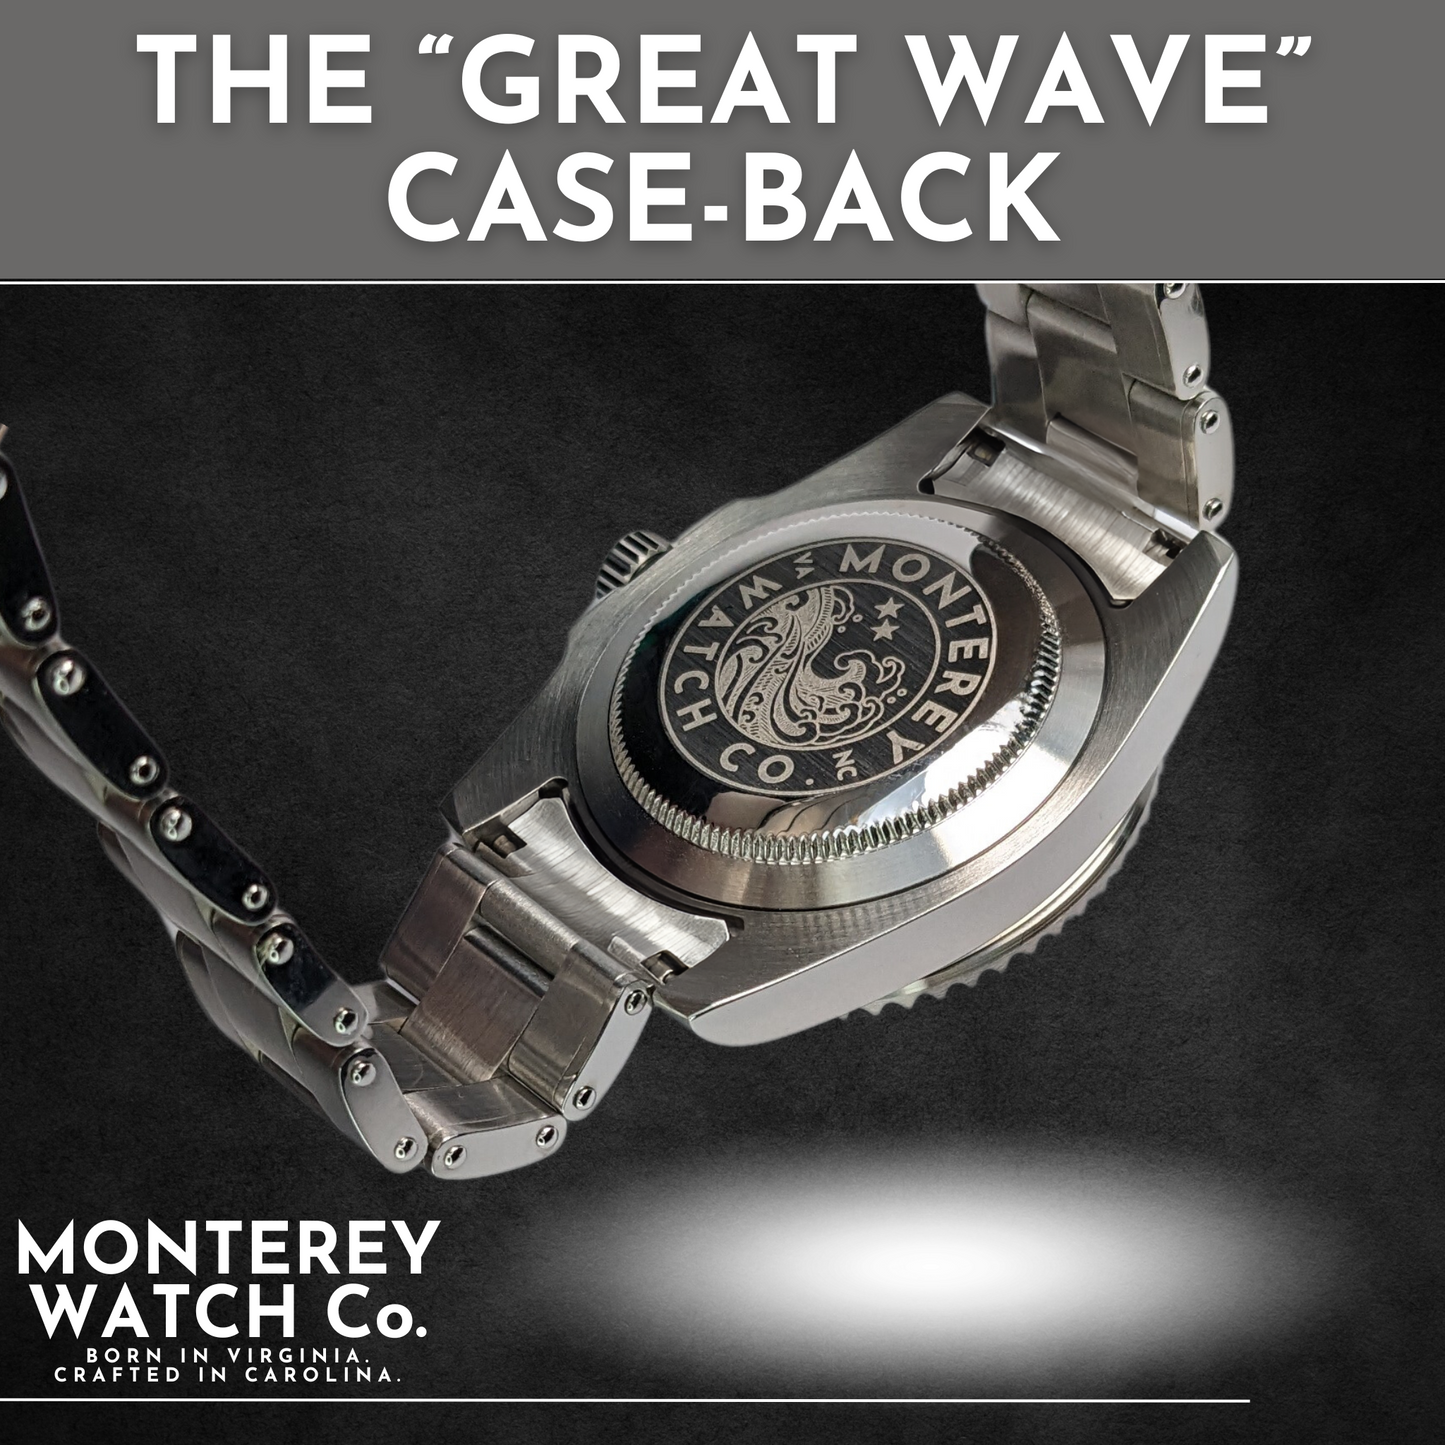 The Blacktip GMT Time Zone Ready Classic Watch - Monterey Watch Co